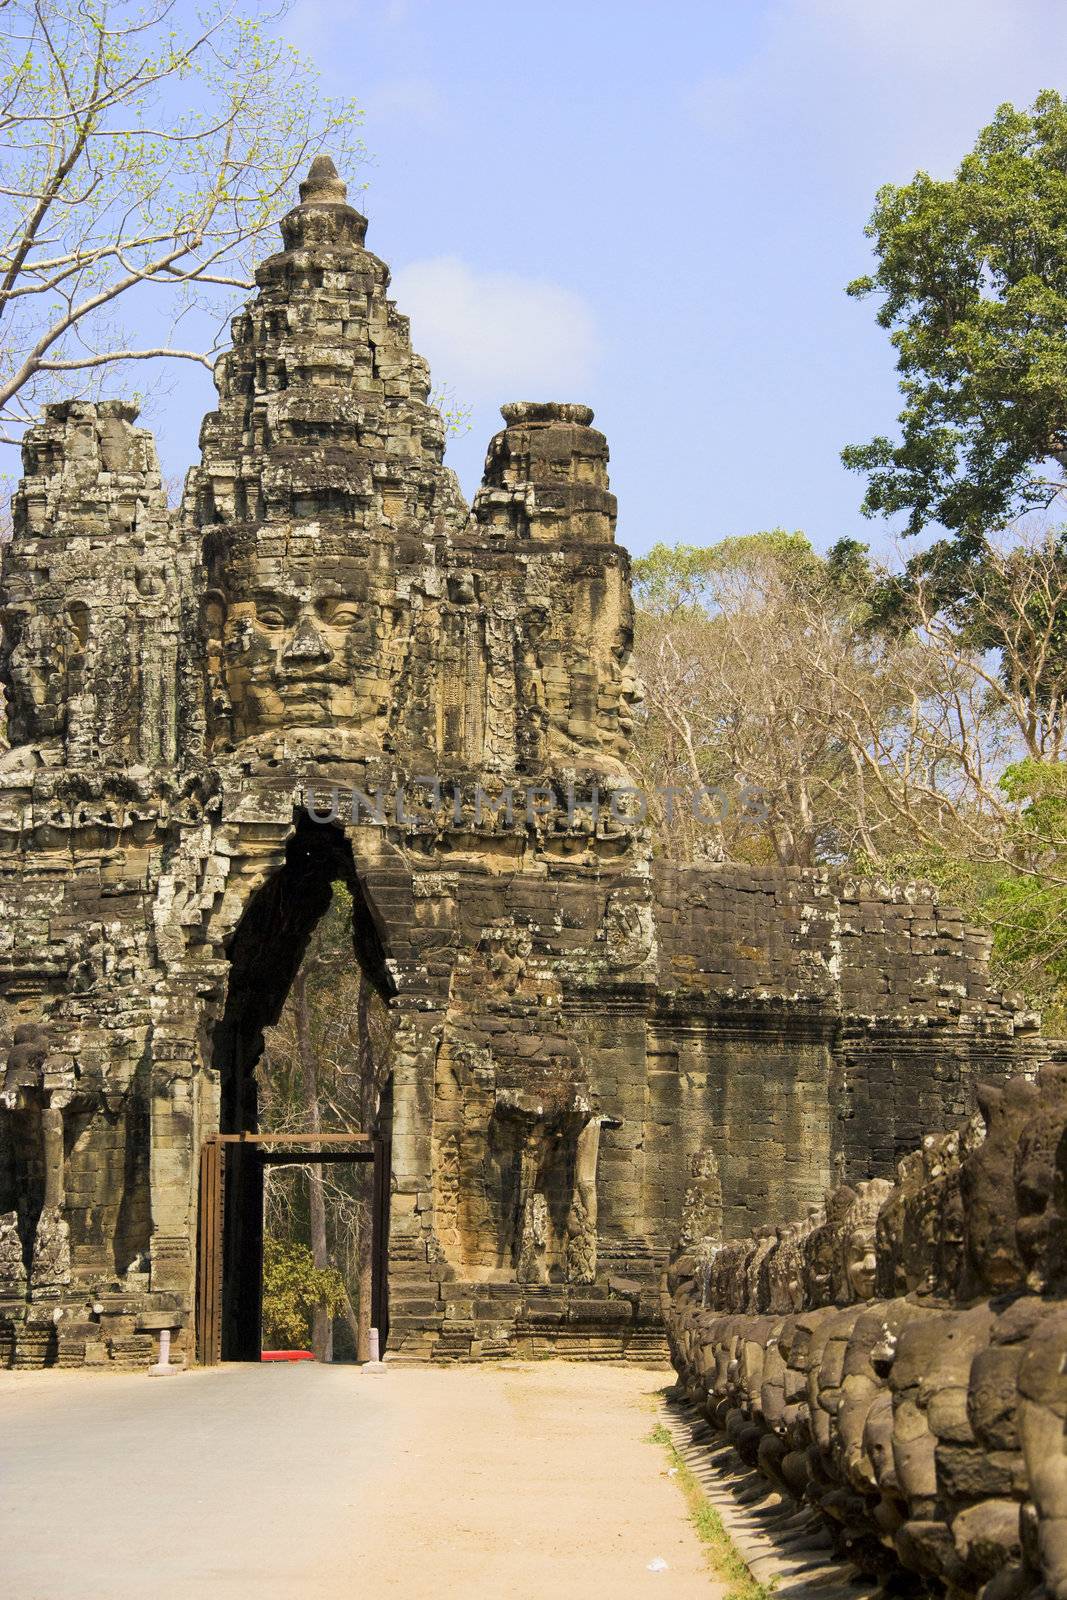 Image of the South Gate of UNESCO's World Heritage Site of Angkor Thom, Siem Reap, Cambodia. 